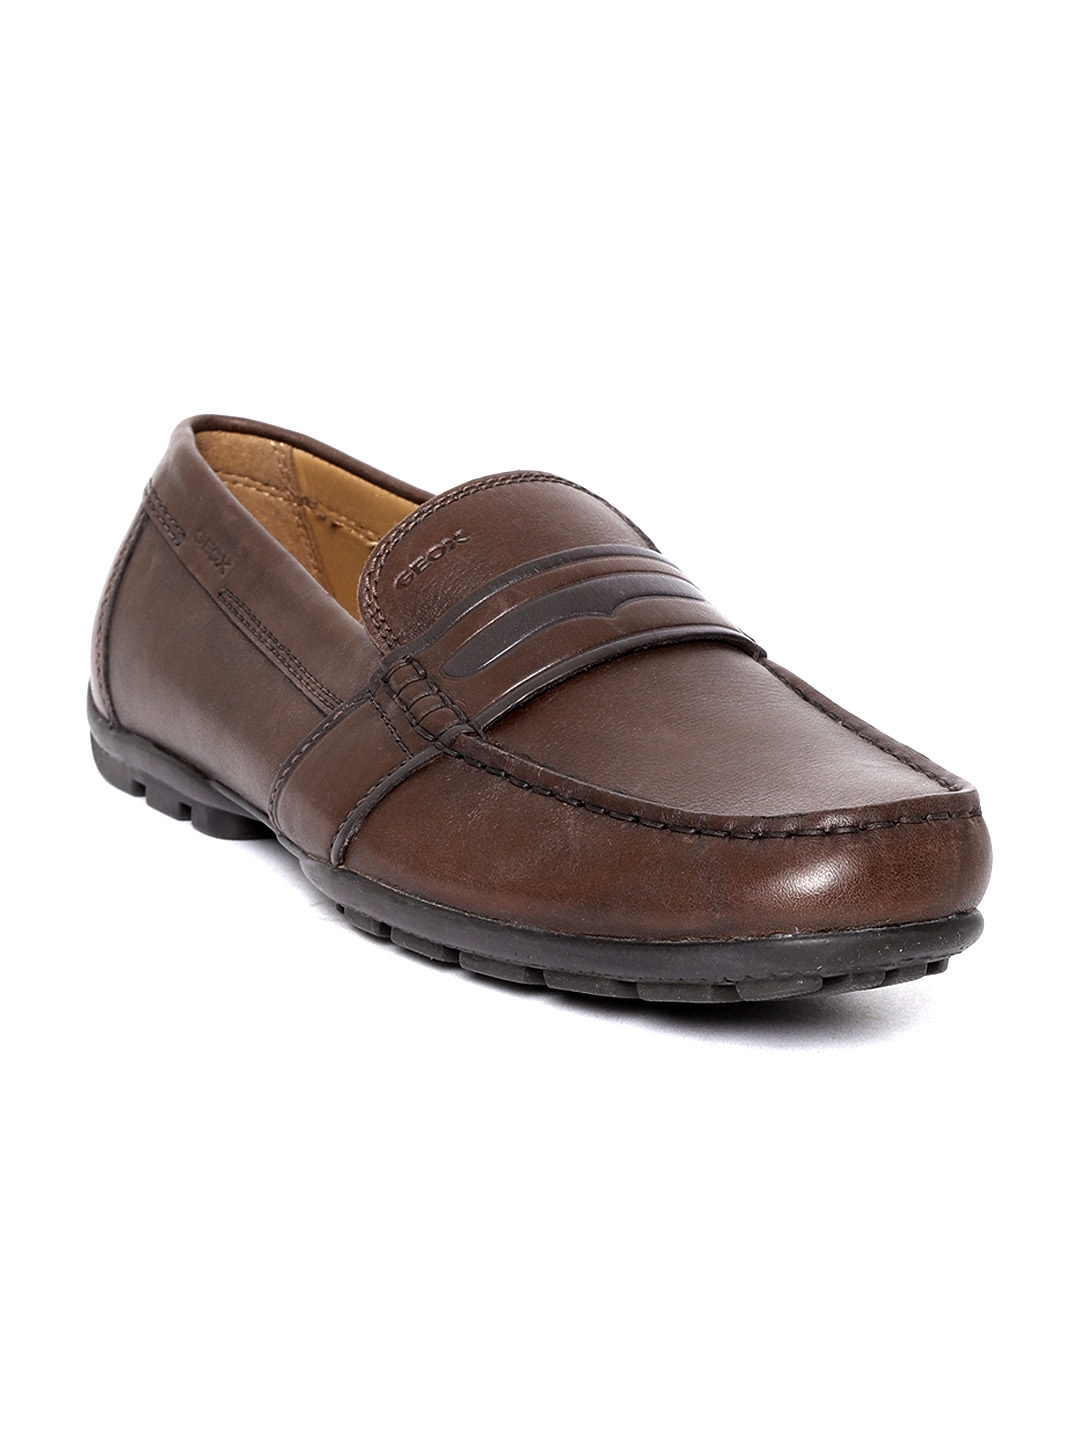 Buy Geox Men Coffee Brown Leather Loafers - Casual Shoes for Men ...